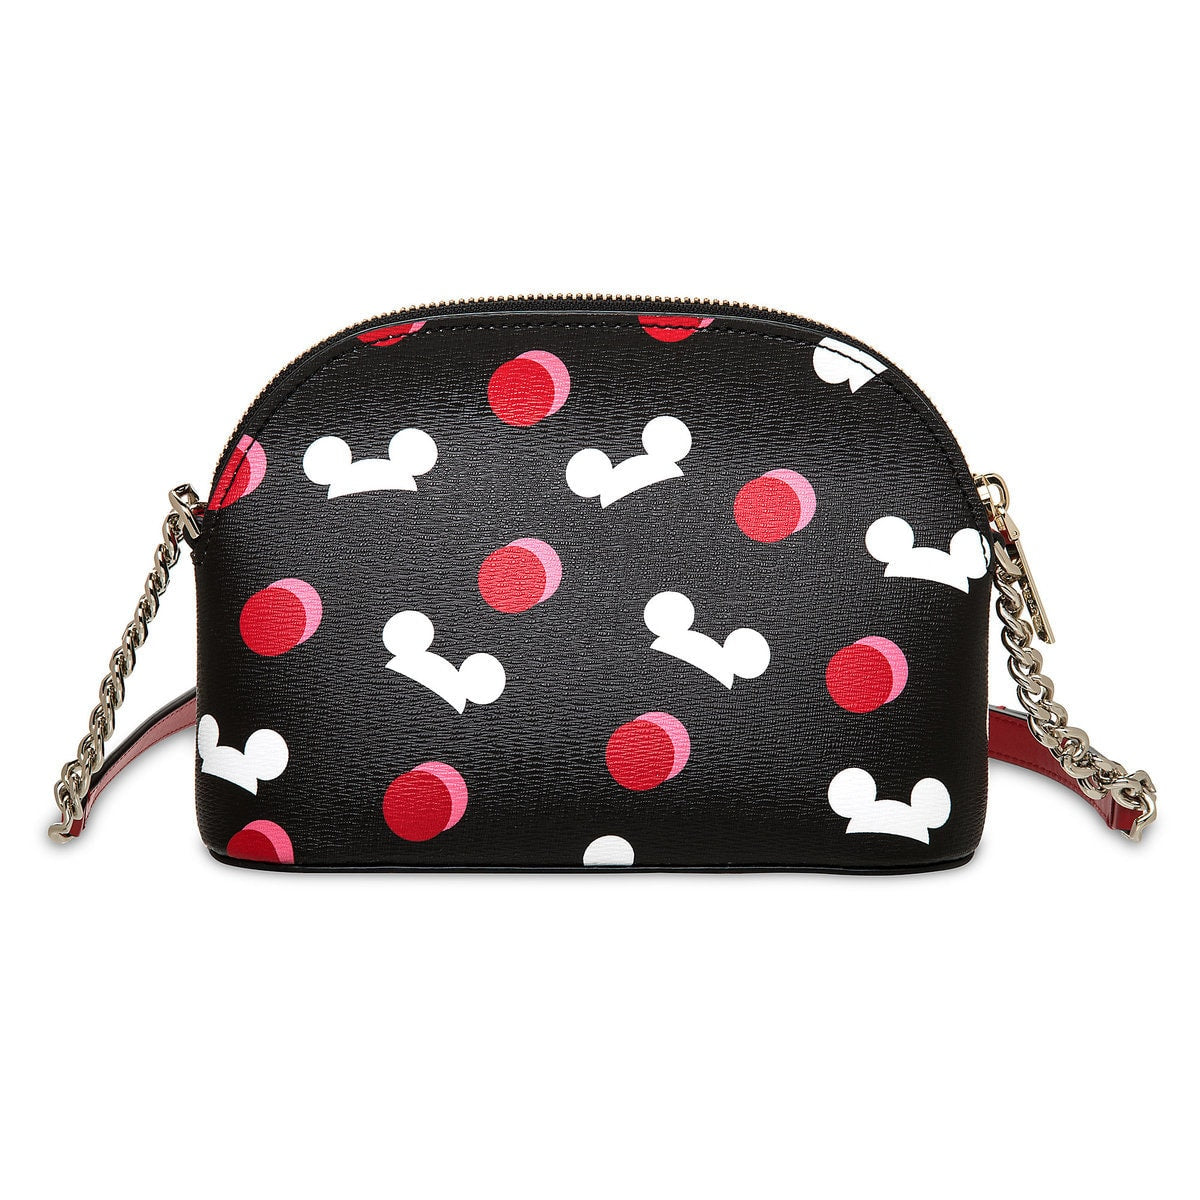 Disney Mickey Mouse Ear Hat Crossbody Black by Kate Spade New York New with Tag